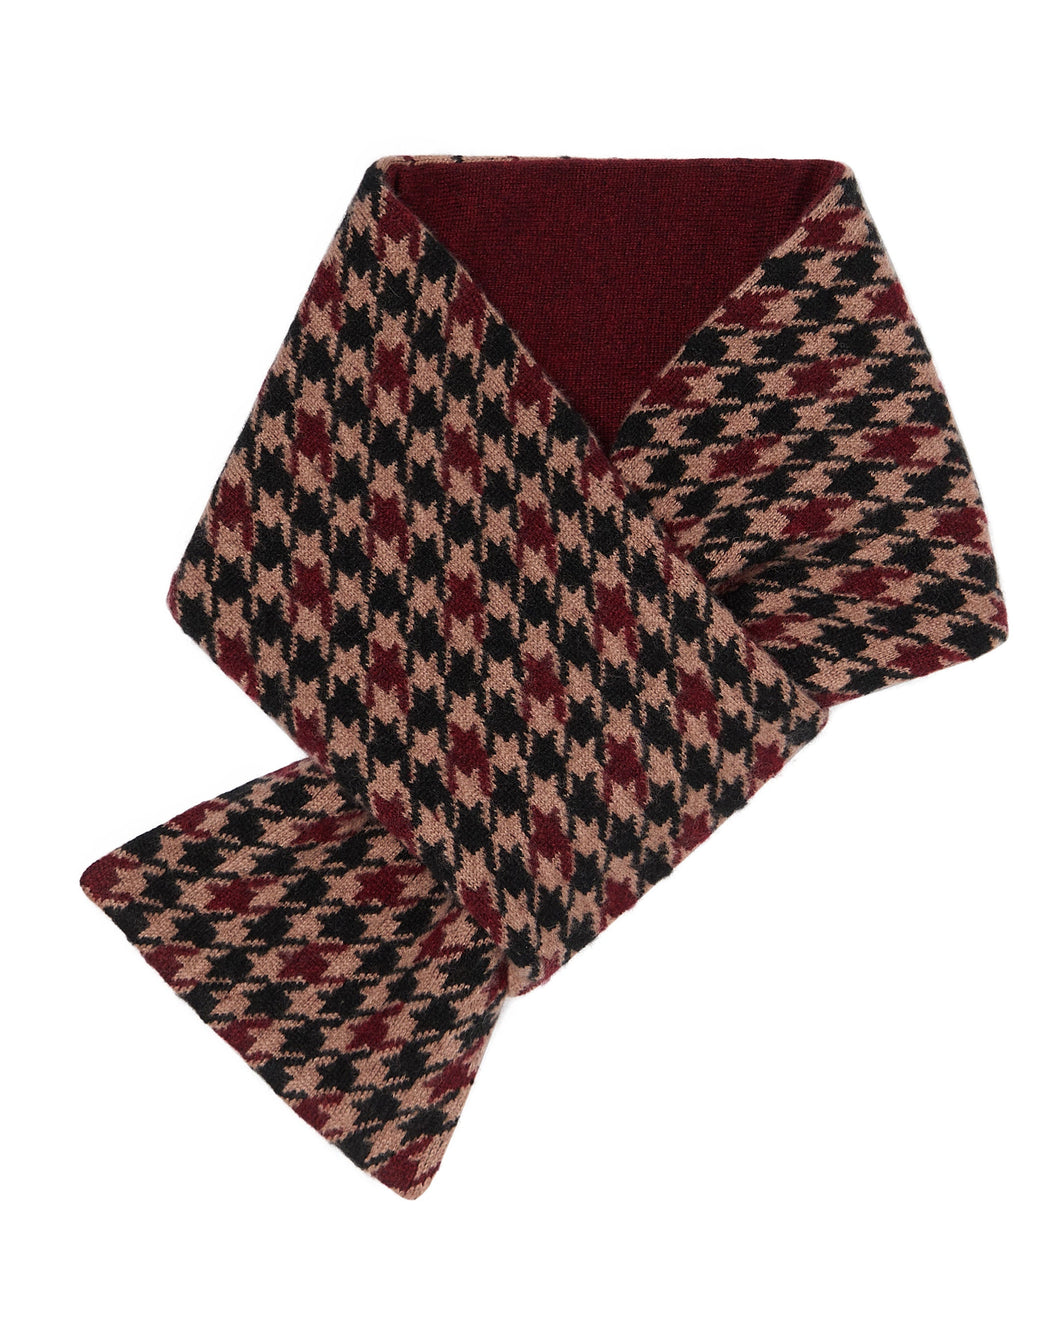 N.Peal Unisex Houndstooth Cross Cashmere Scarf Coconut Brown